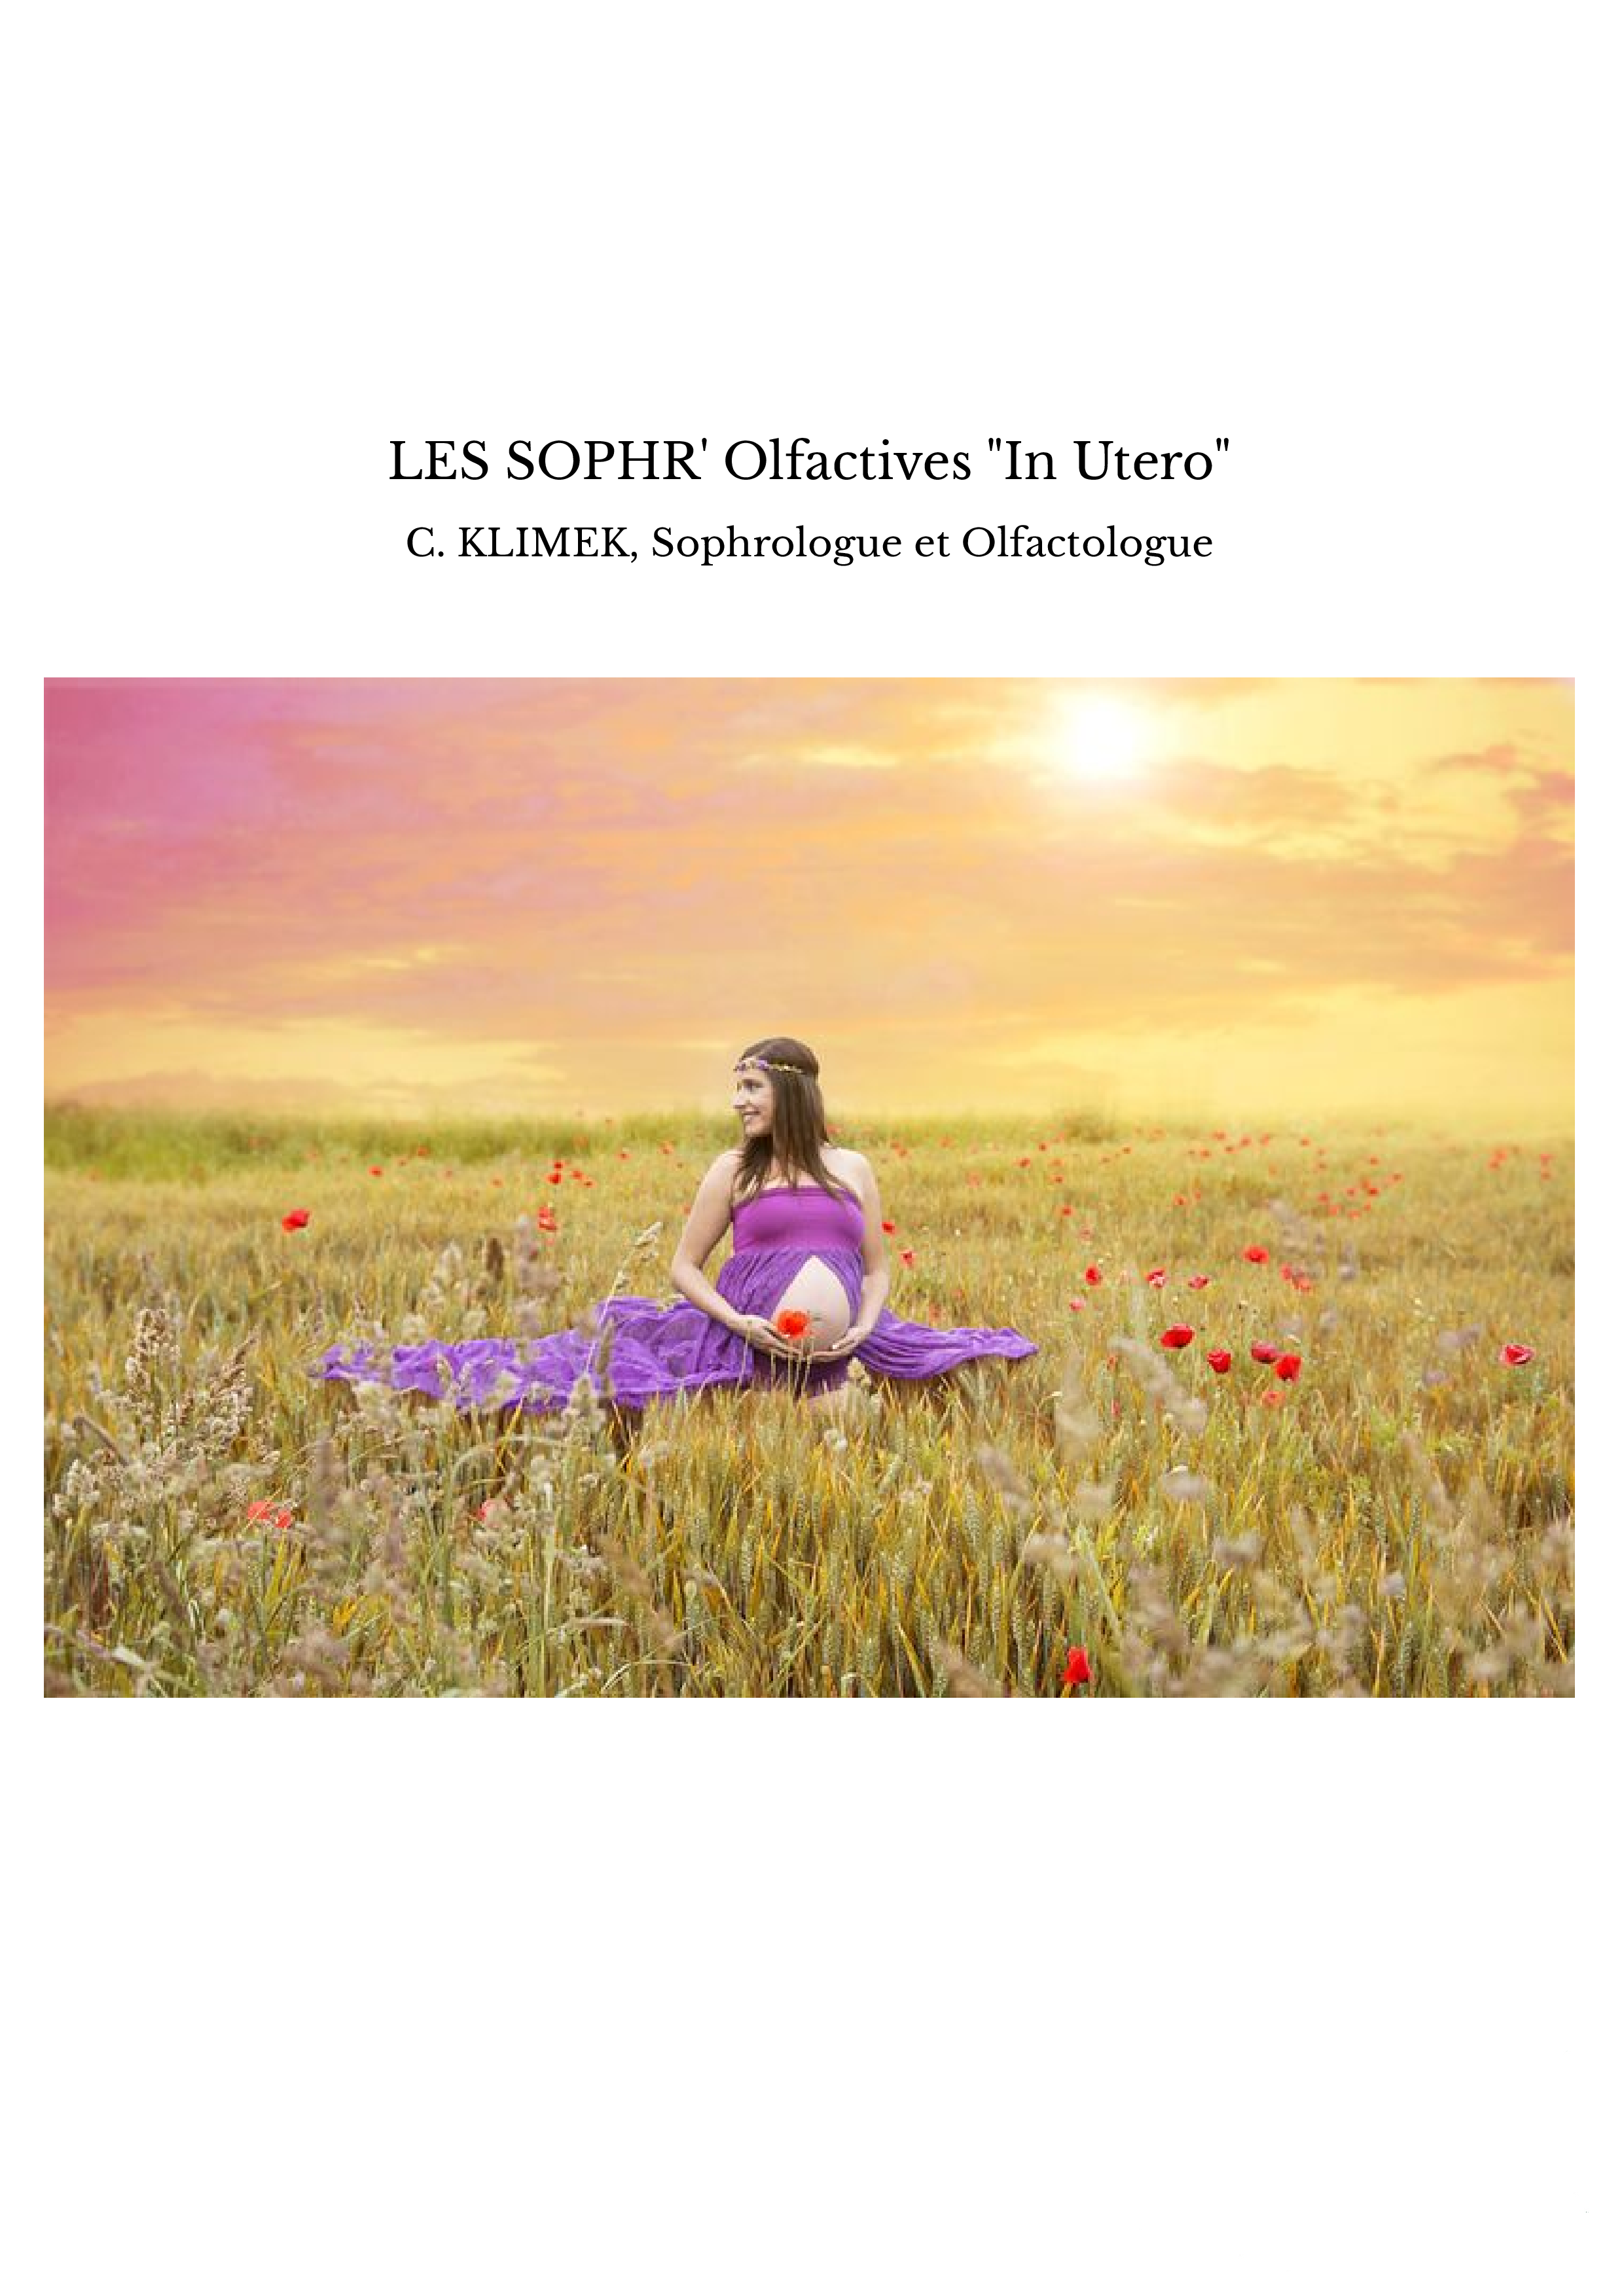 LES SOPHR' Olfactives "In Utero"